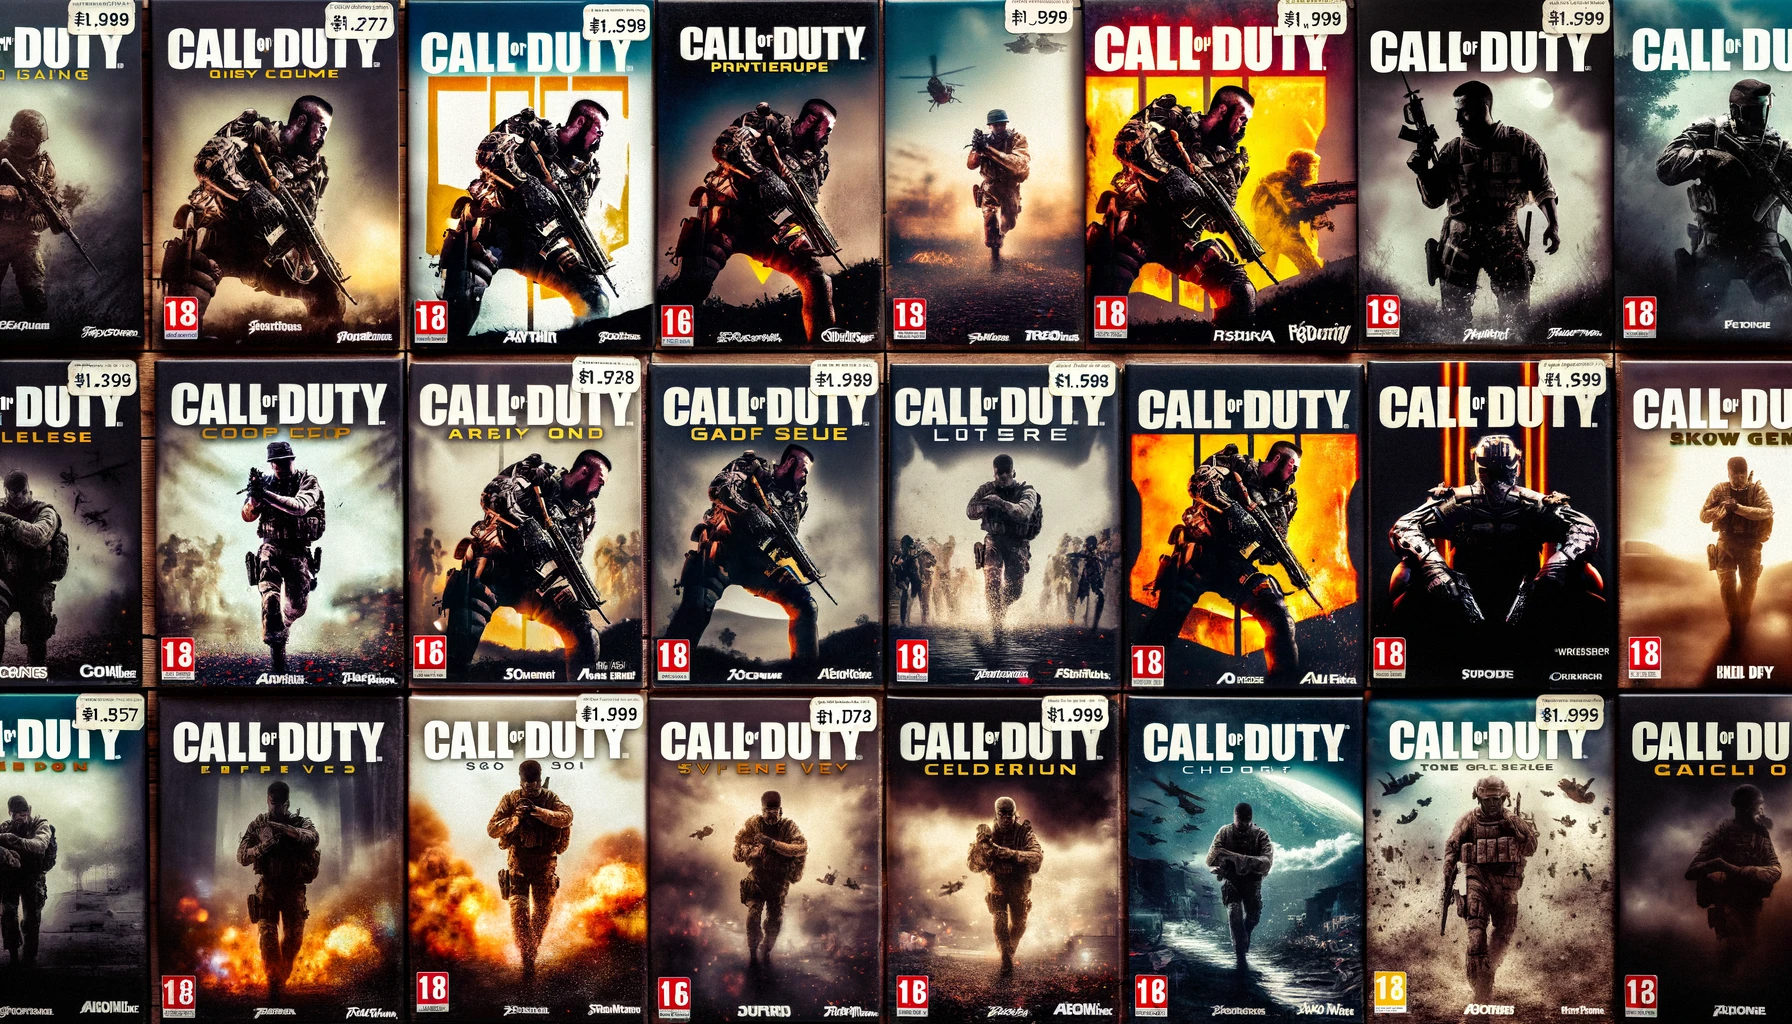 Photo of a Call of Duty game cover in the foreground